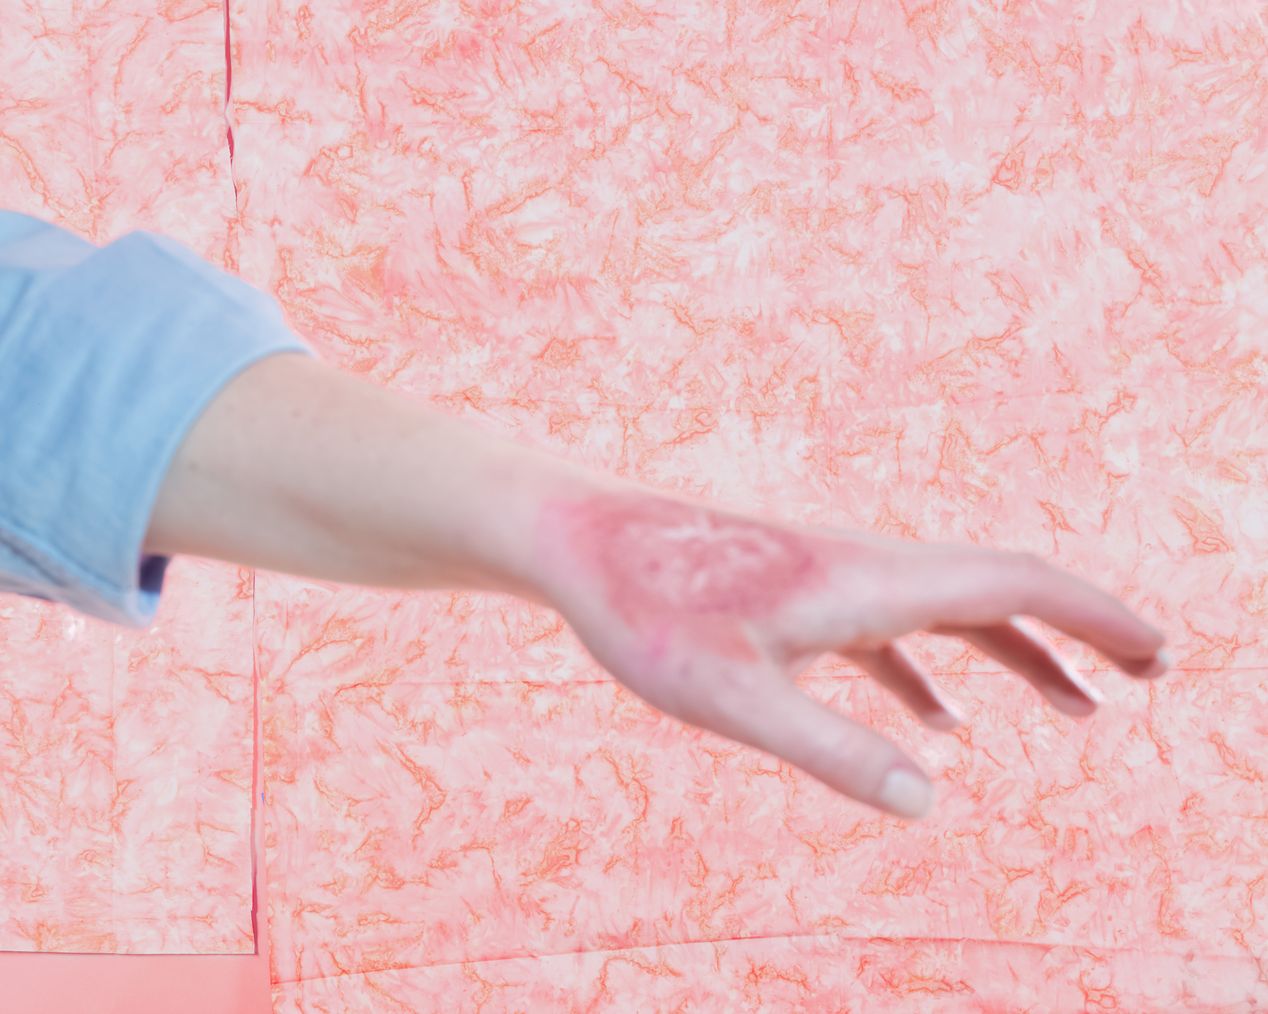 Blurred image of a painted wound on a hand, art photography, Ilona Szwarc, contemporary Los Angeles artist.